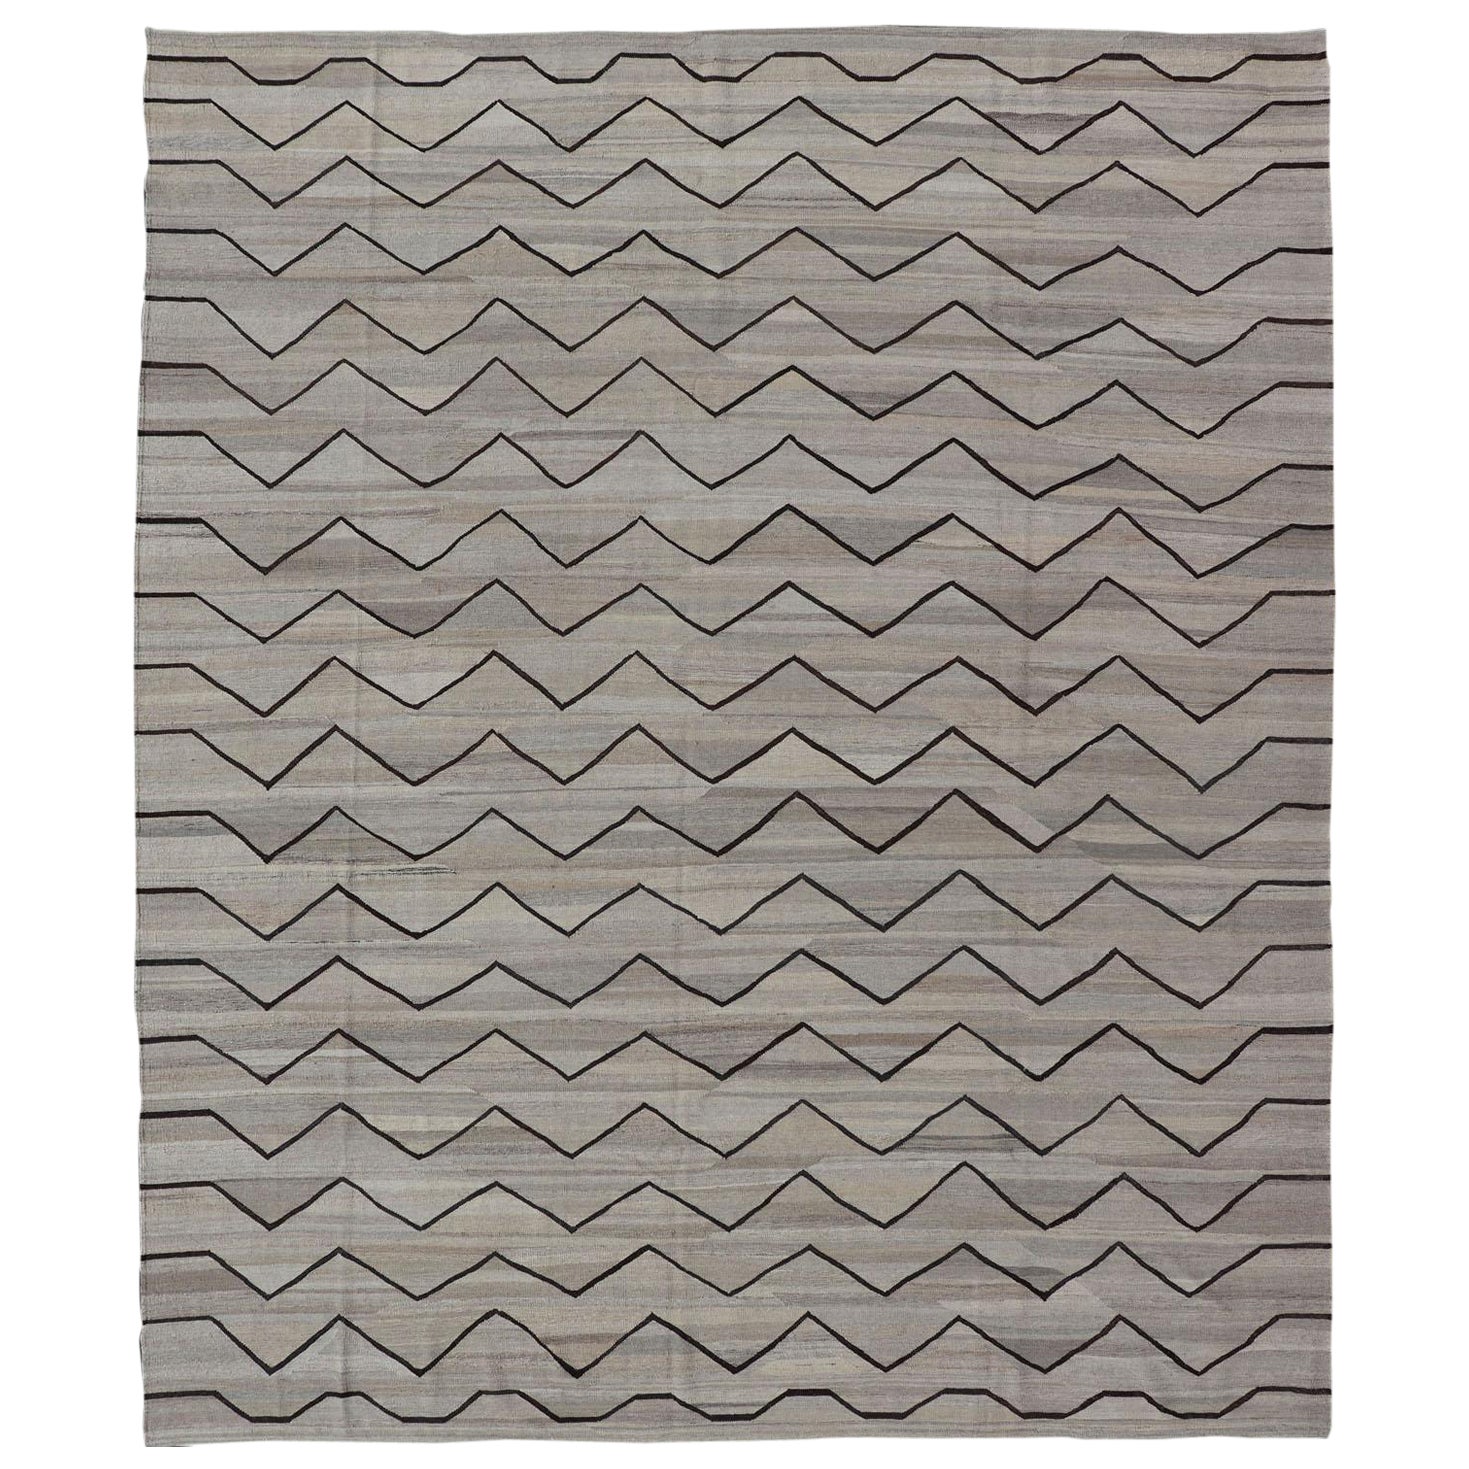 Natural Color-Tone Flat-Weave Modern Kilim in Grays and Brown For Sale